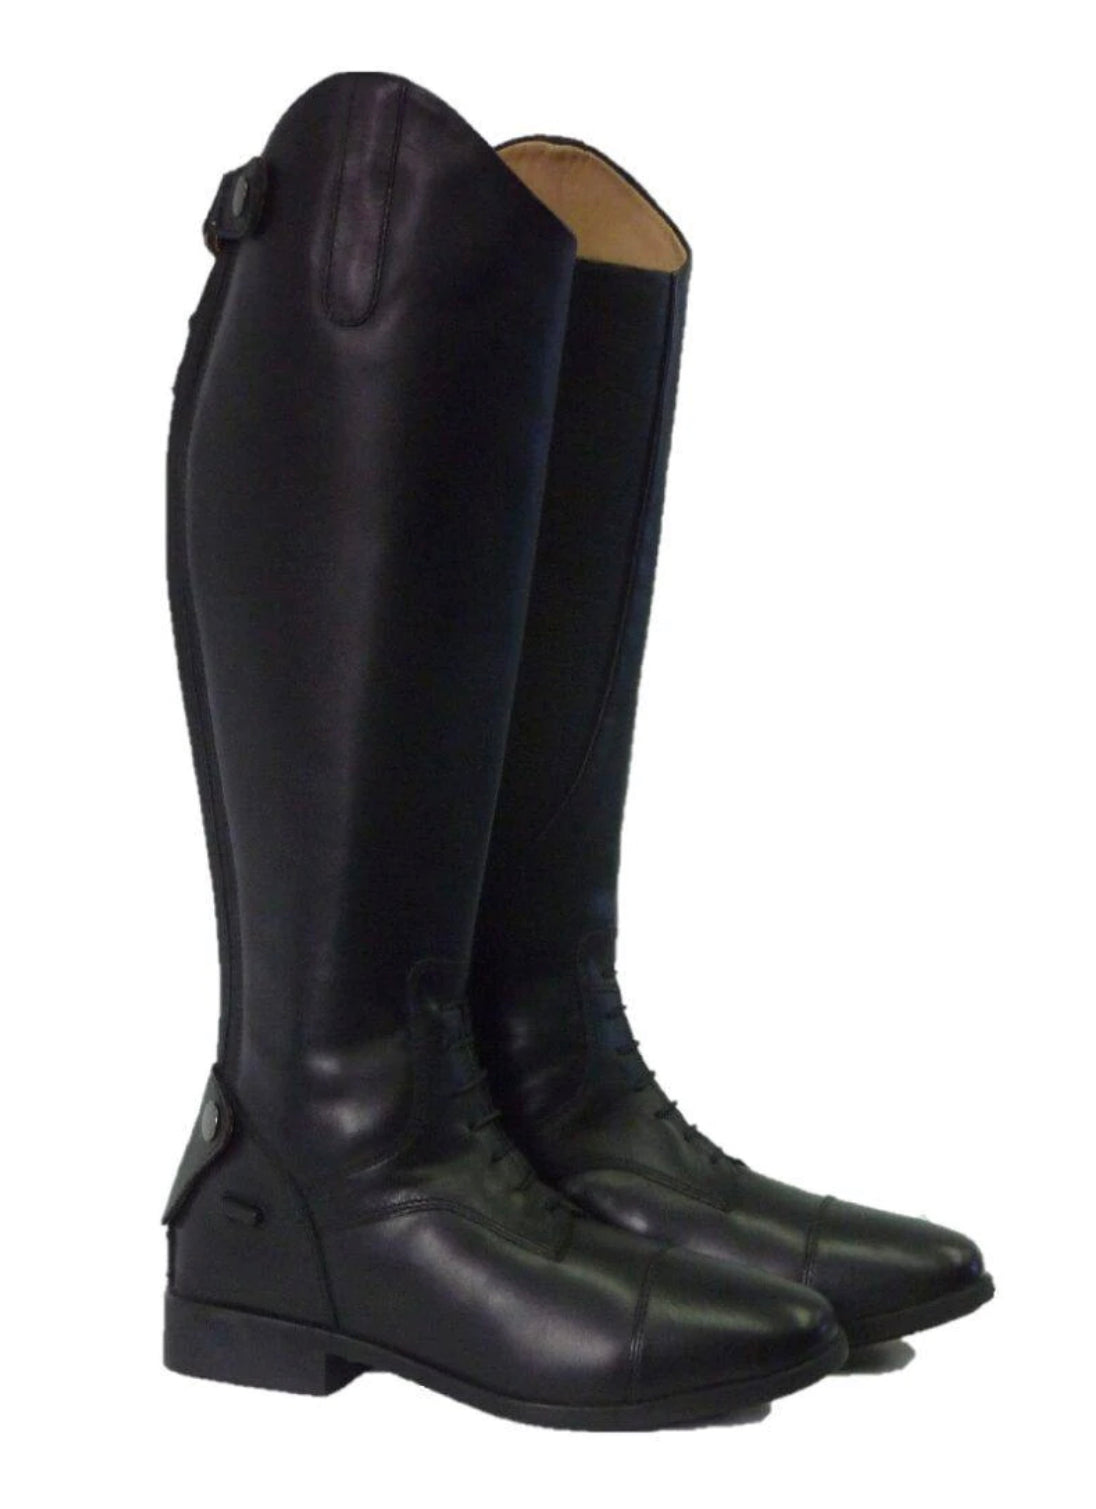 CAVALIER LEATHER TALL BOOT